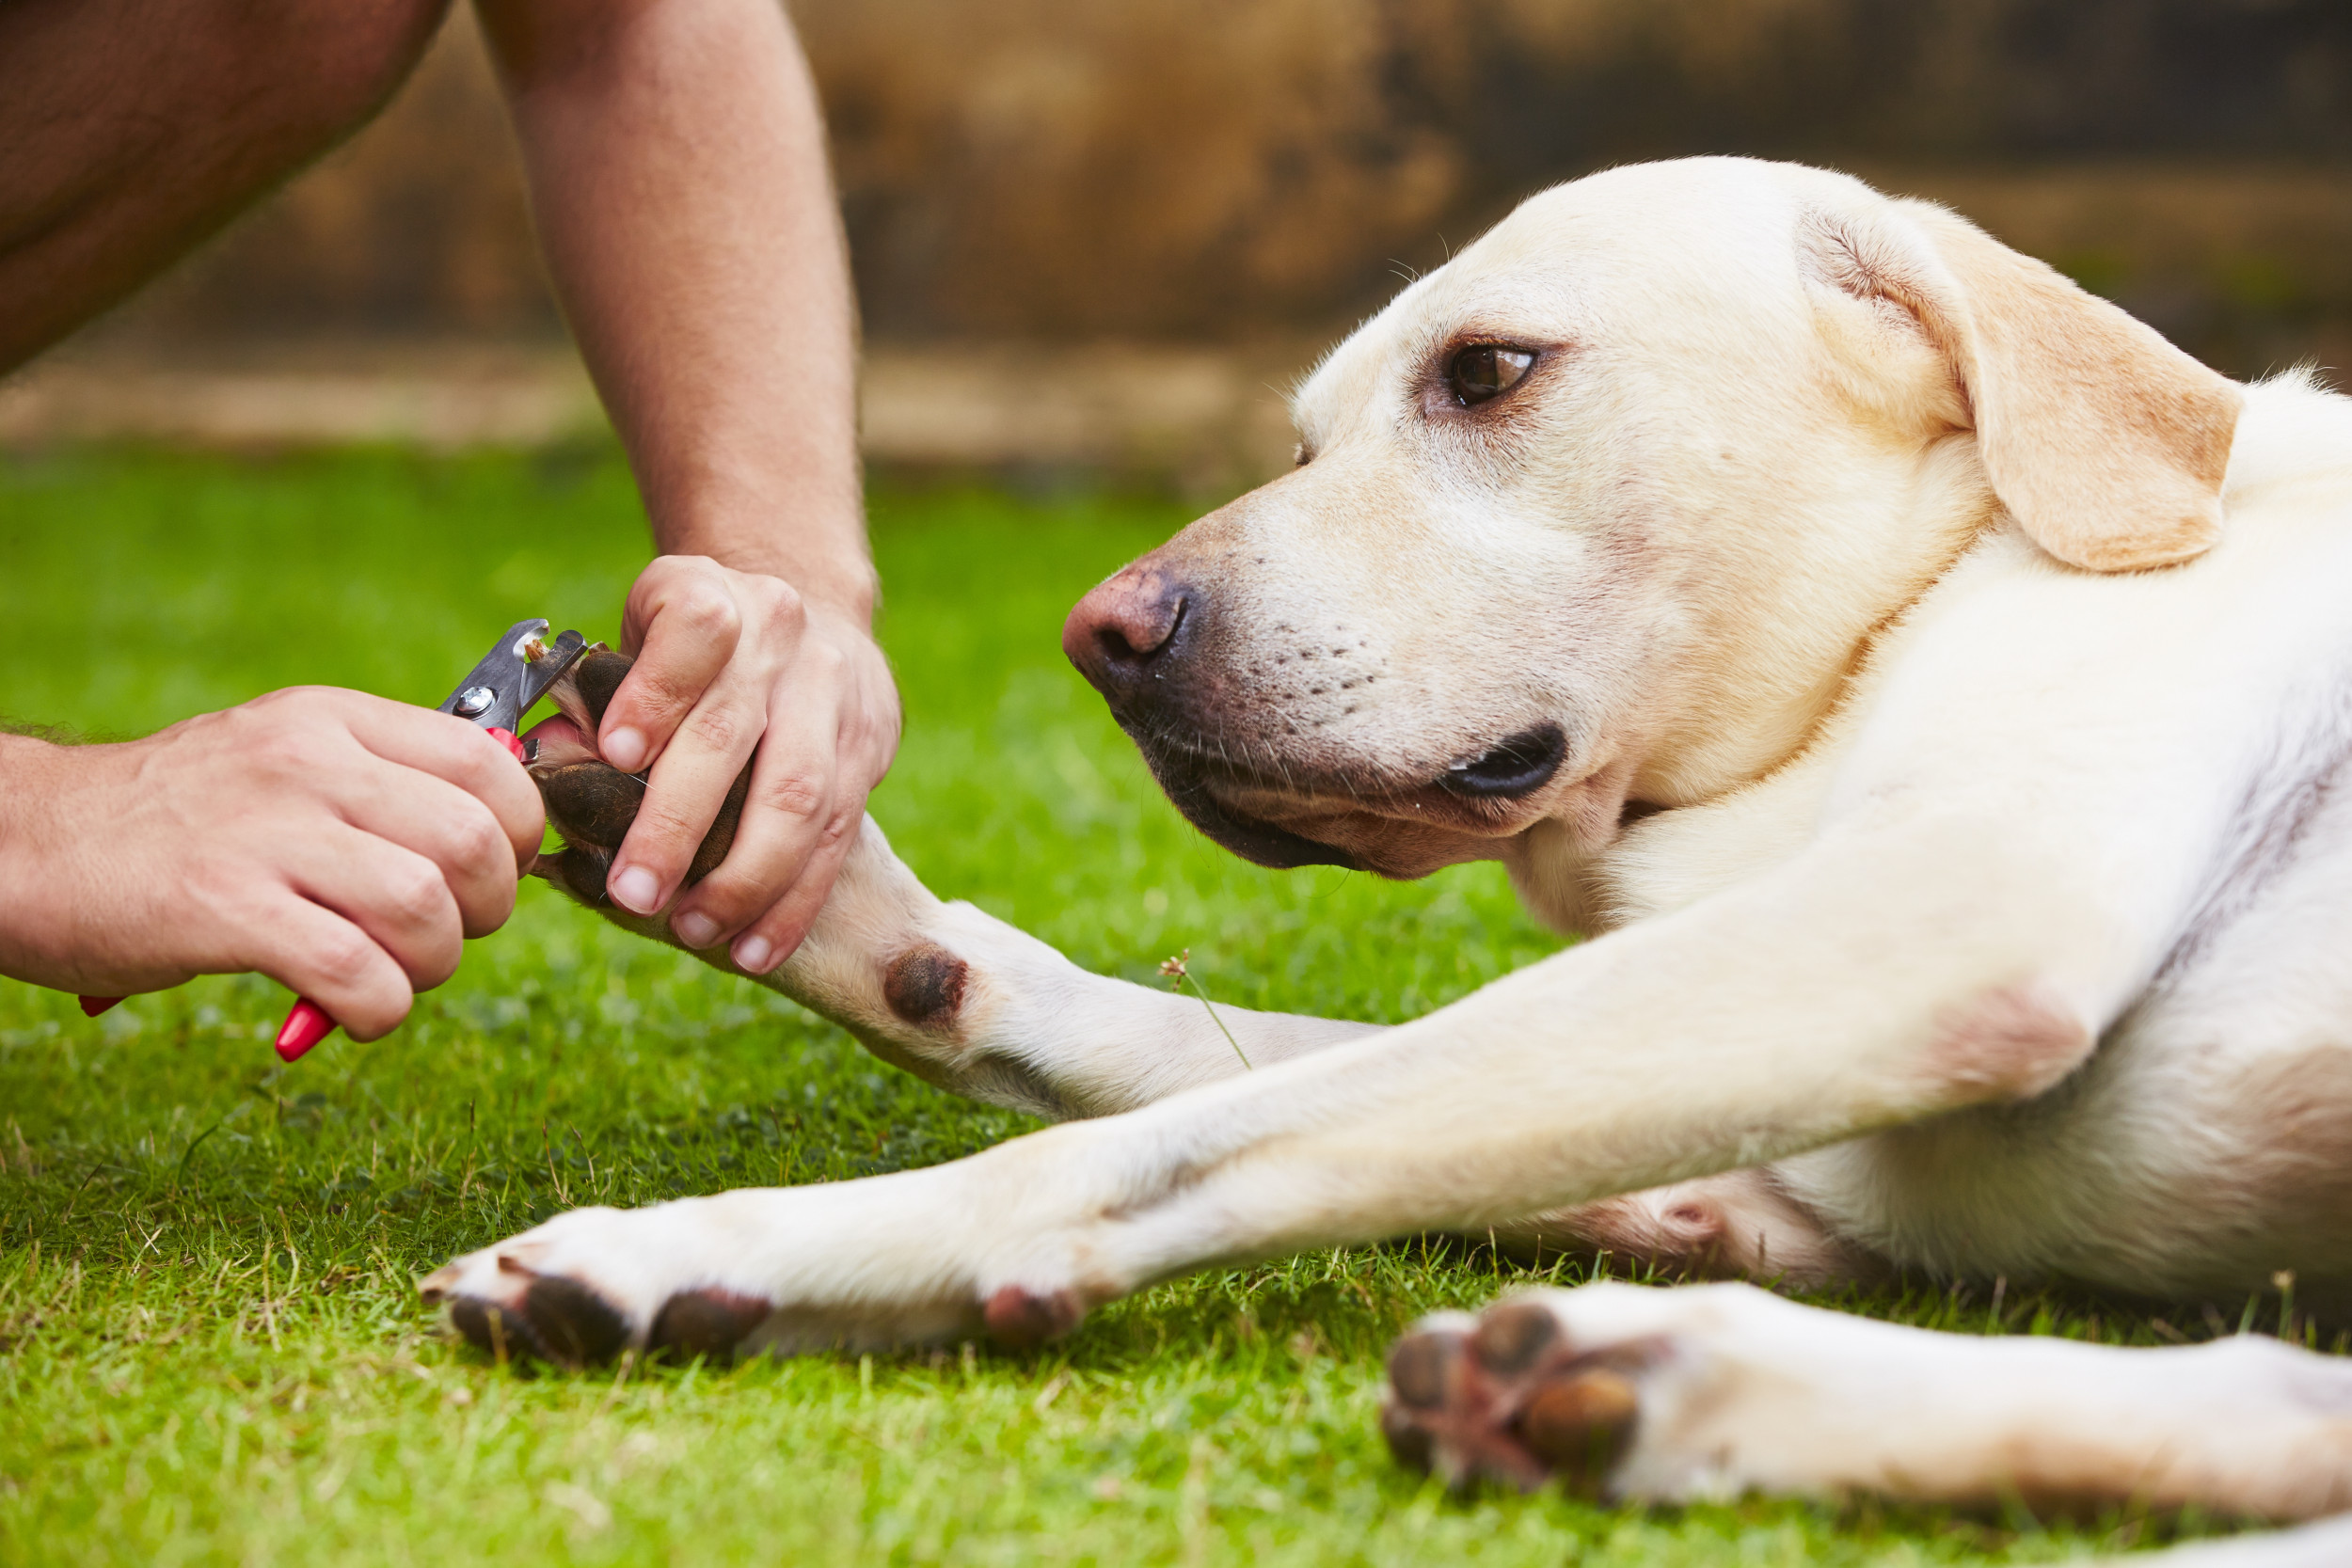 How to Cut Your Dog's Nails in the Safest Way Possible